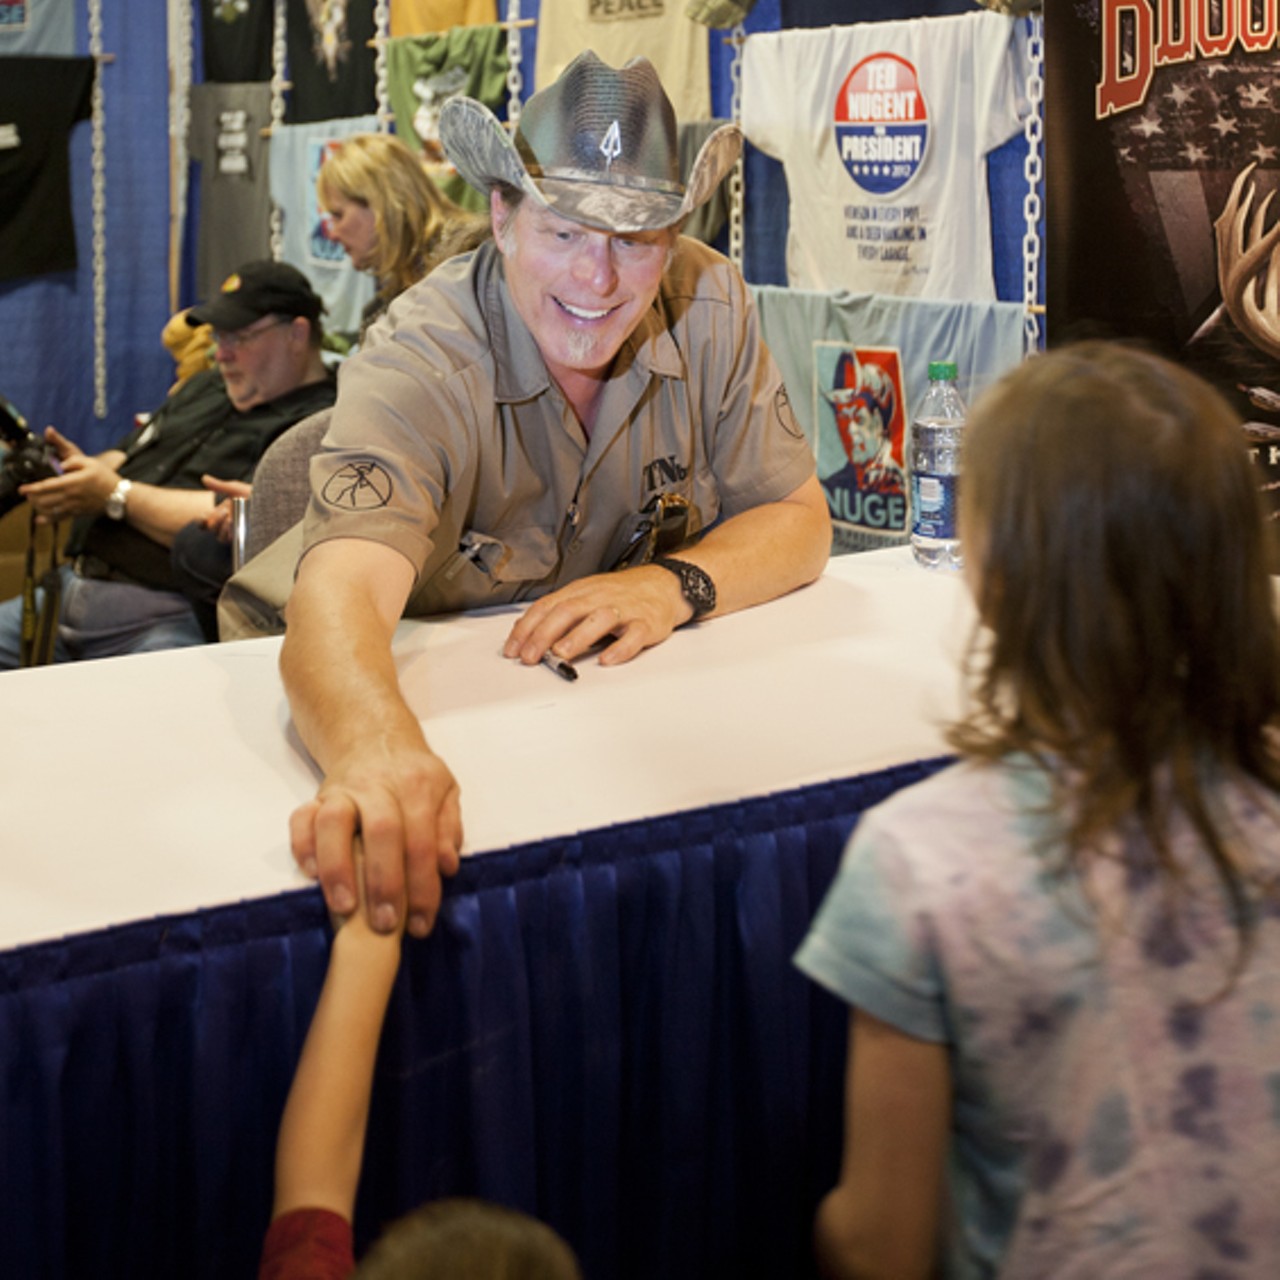 Ted Nugent signing autographs and visiting with fans.